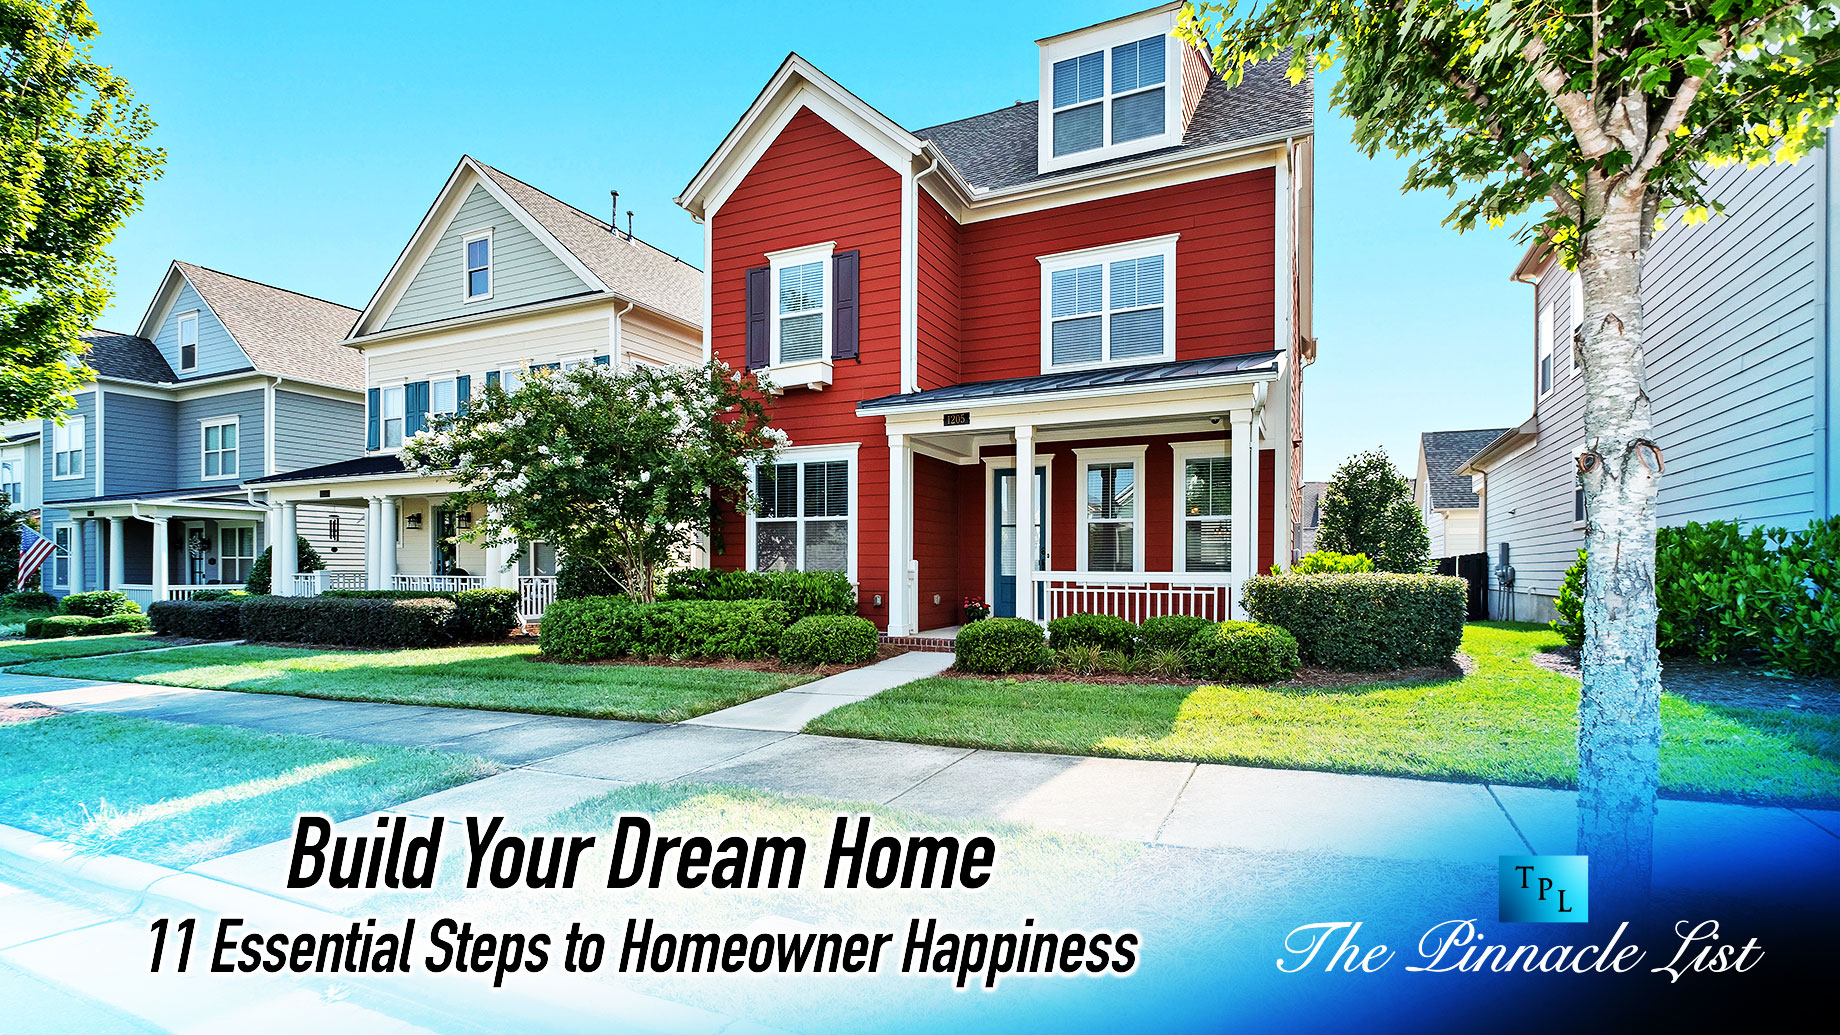 Build Your Dream Home: 11 Essential Steps to Homeowner Happiness